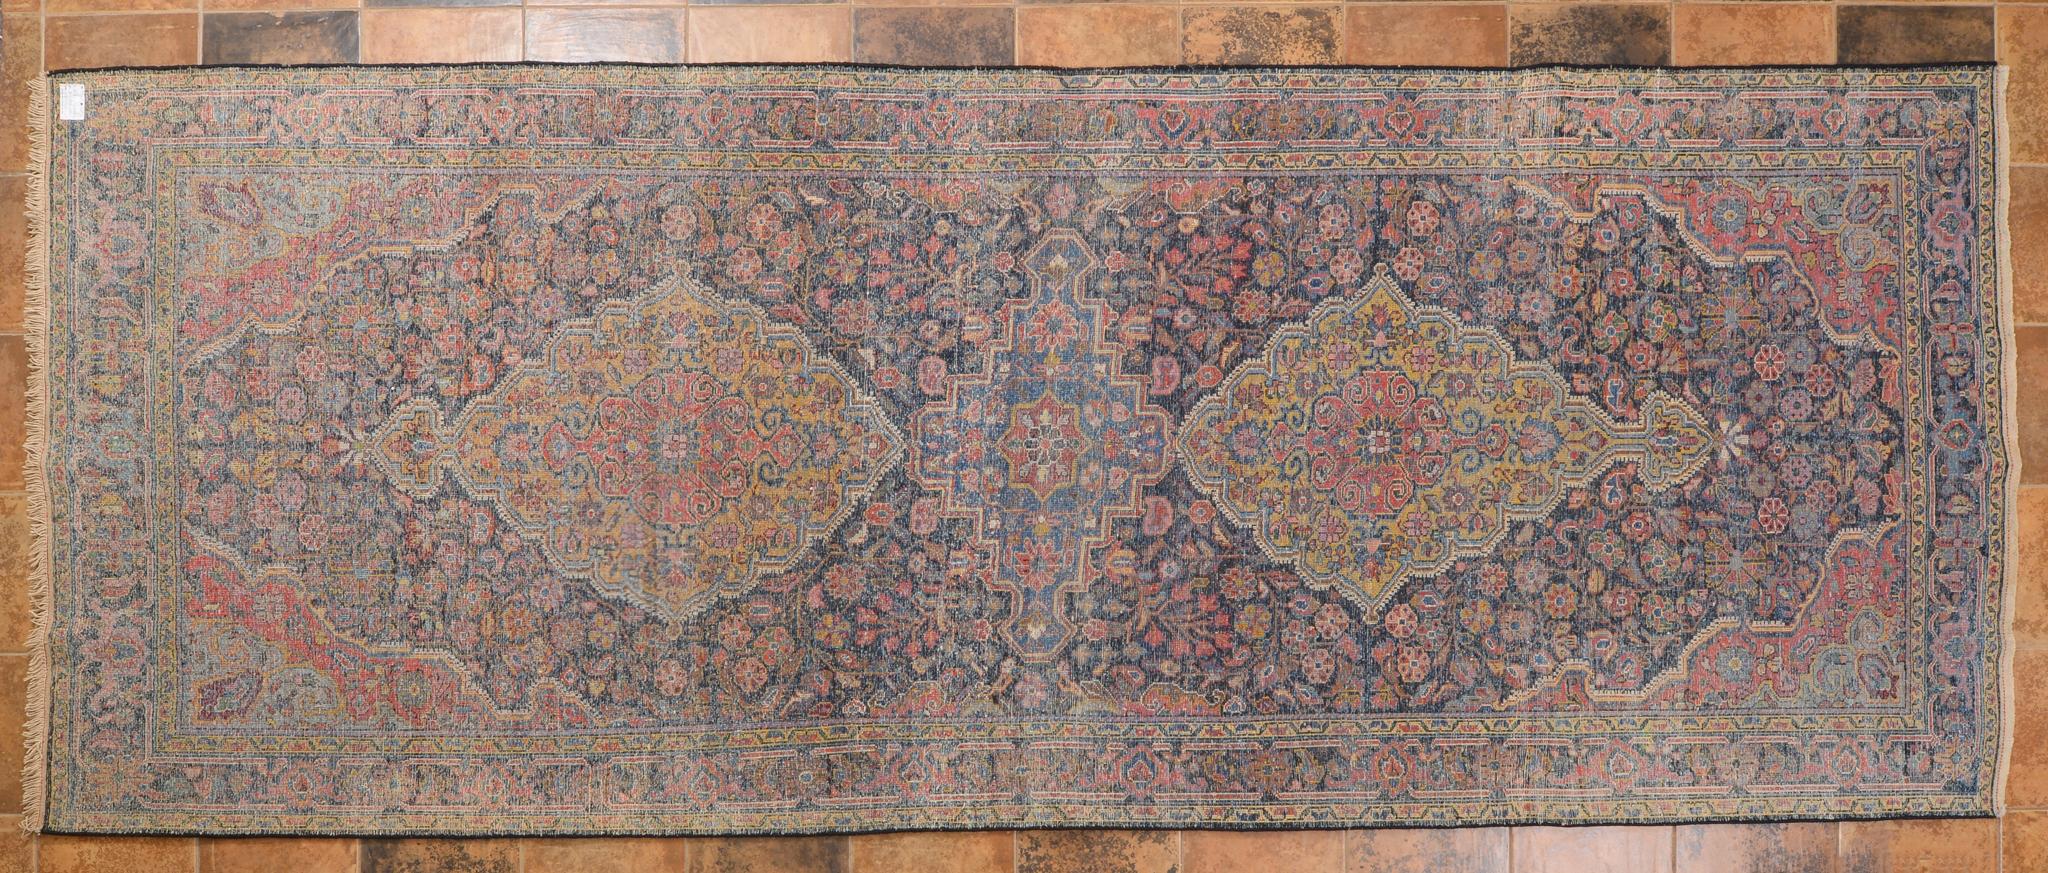 Other Long Old Armenian Carpet For Sale